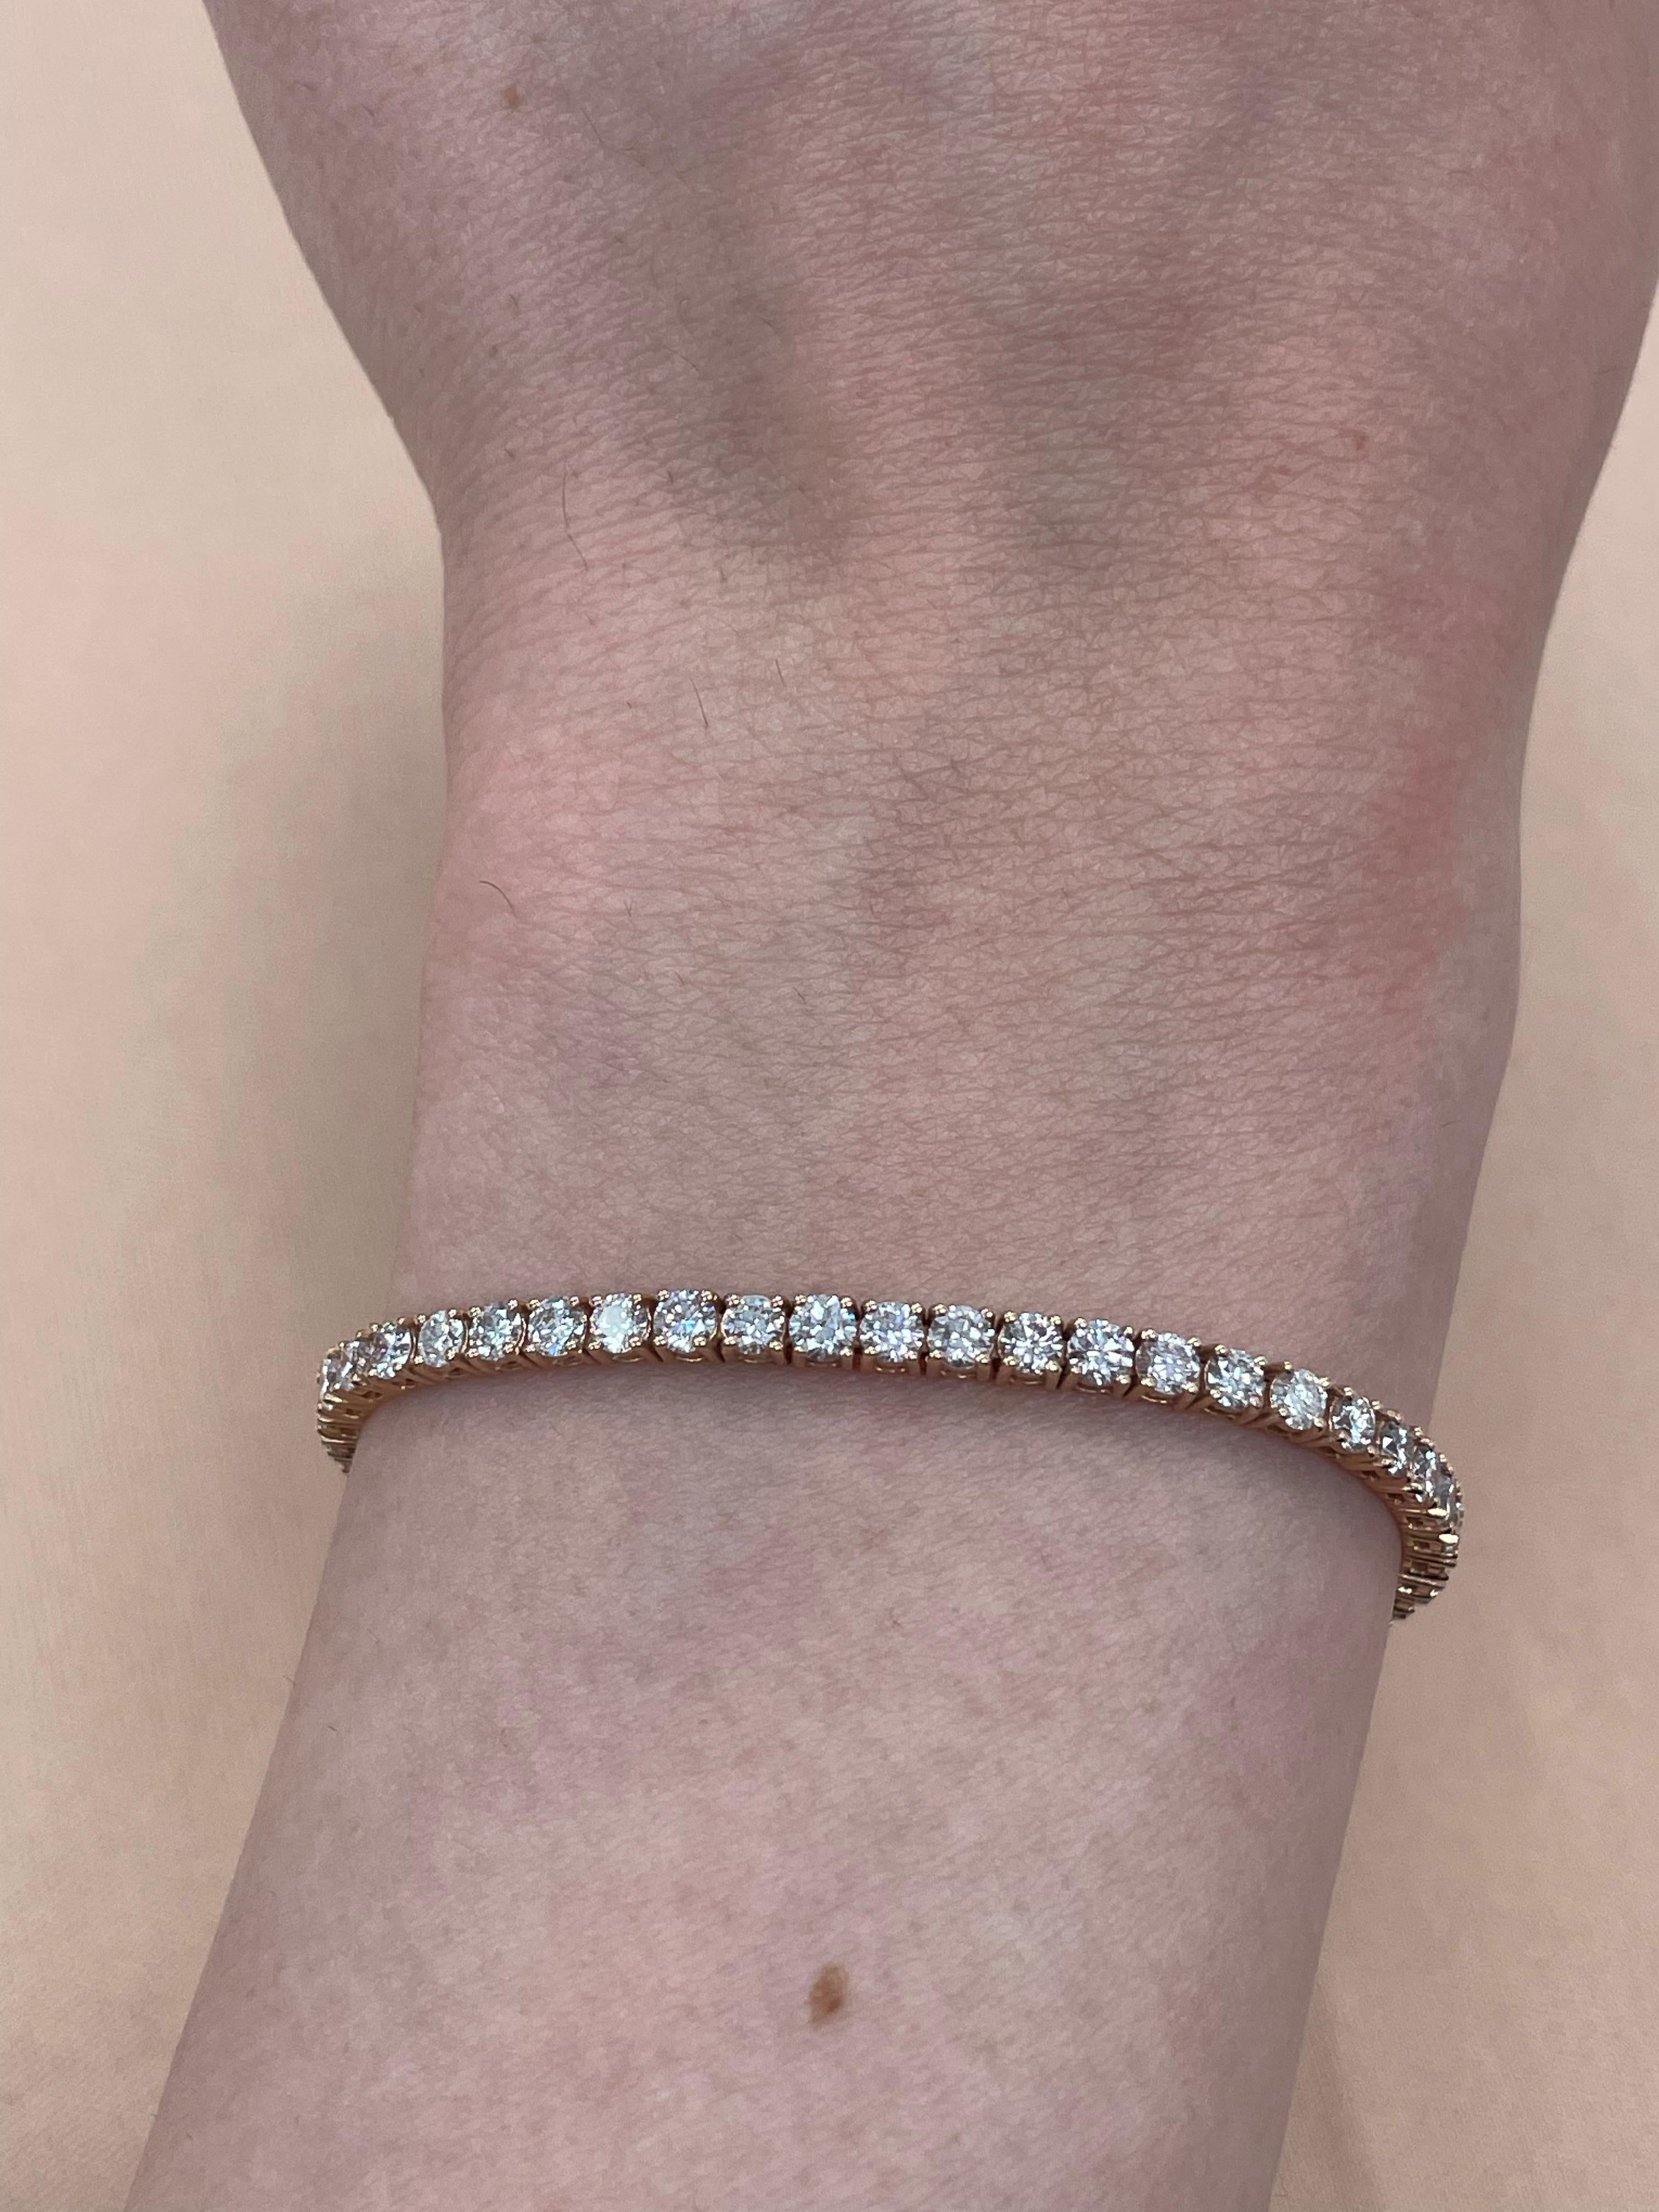 Exquisite and timeless diamonds tennis bracelet, by Alexander Beverly Hills.
63 round brilliant diamonds, 4.42 carats total. Approximately Very Light Pink color (looks like regular white diamonds in mounting) and SI clarity. Four prong set in 14k